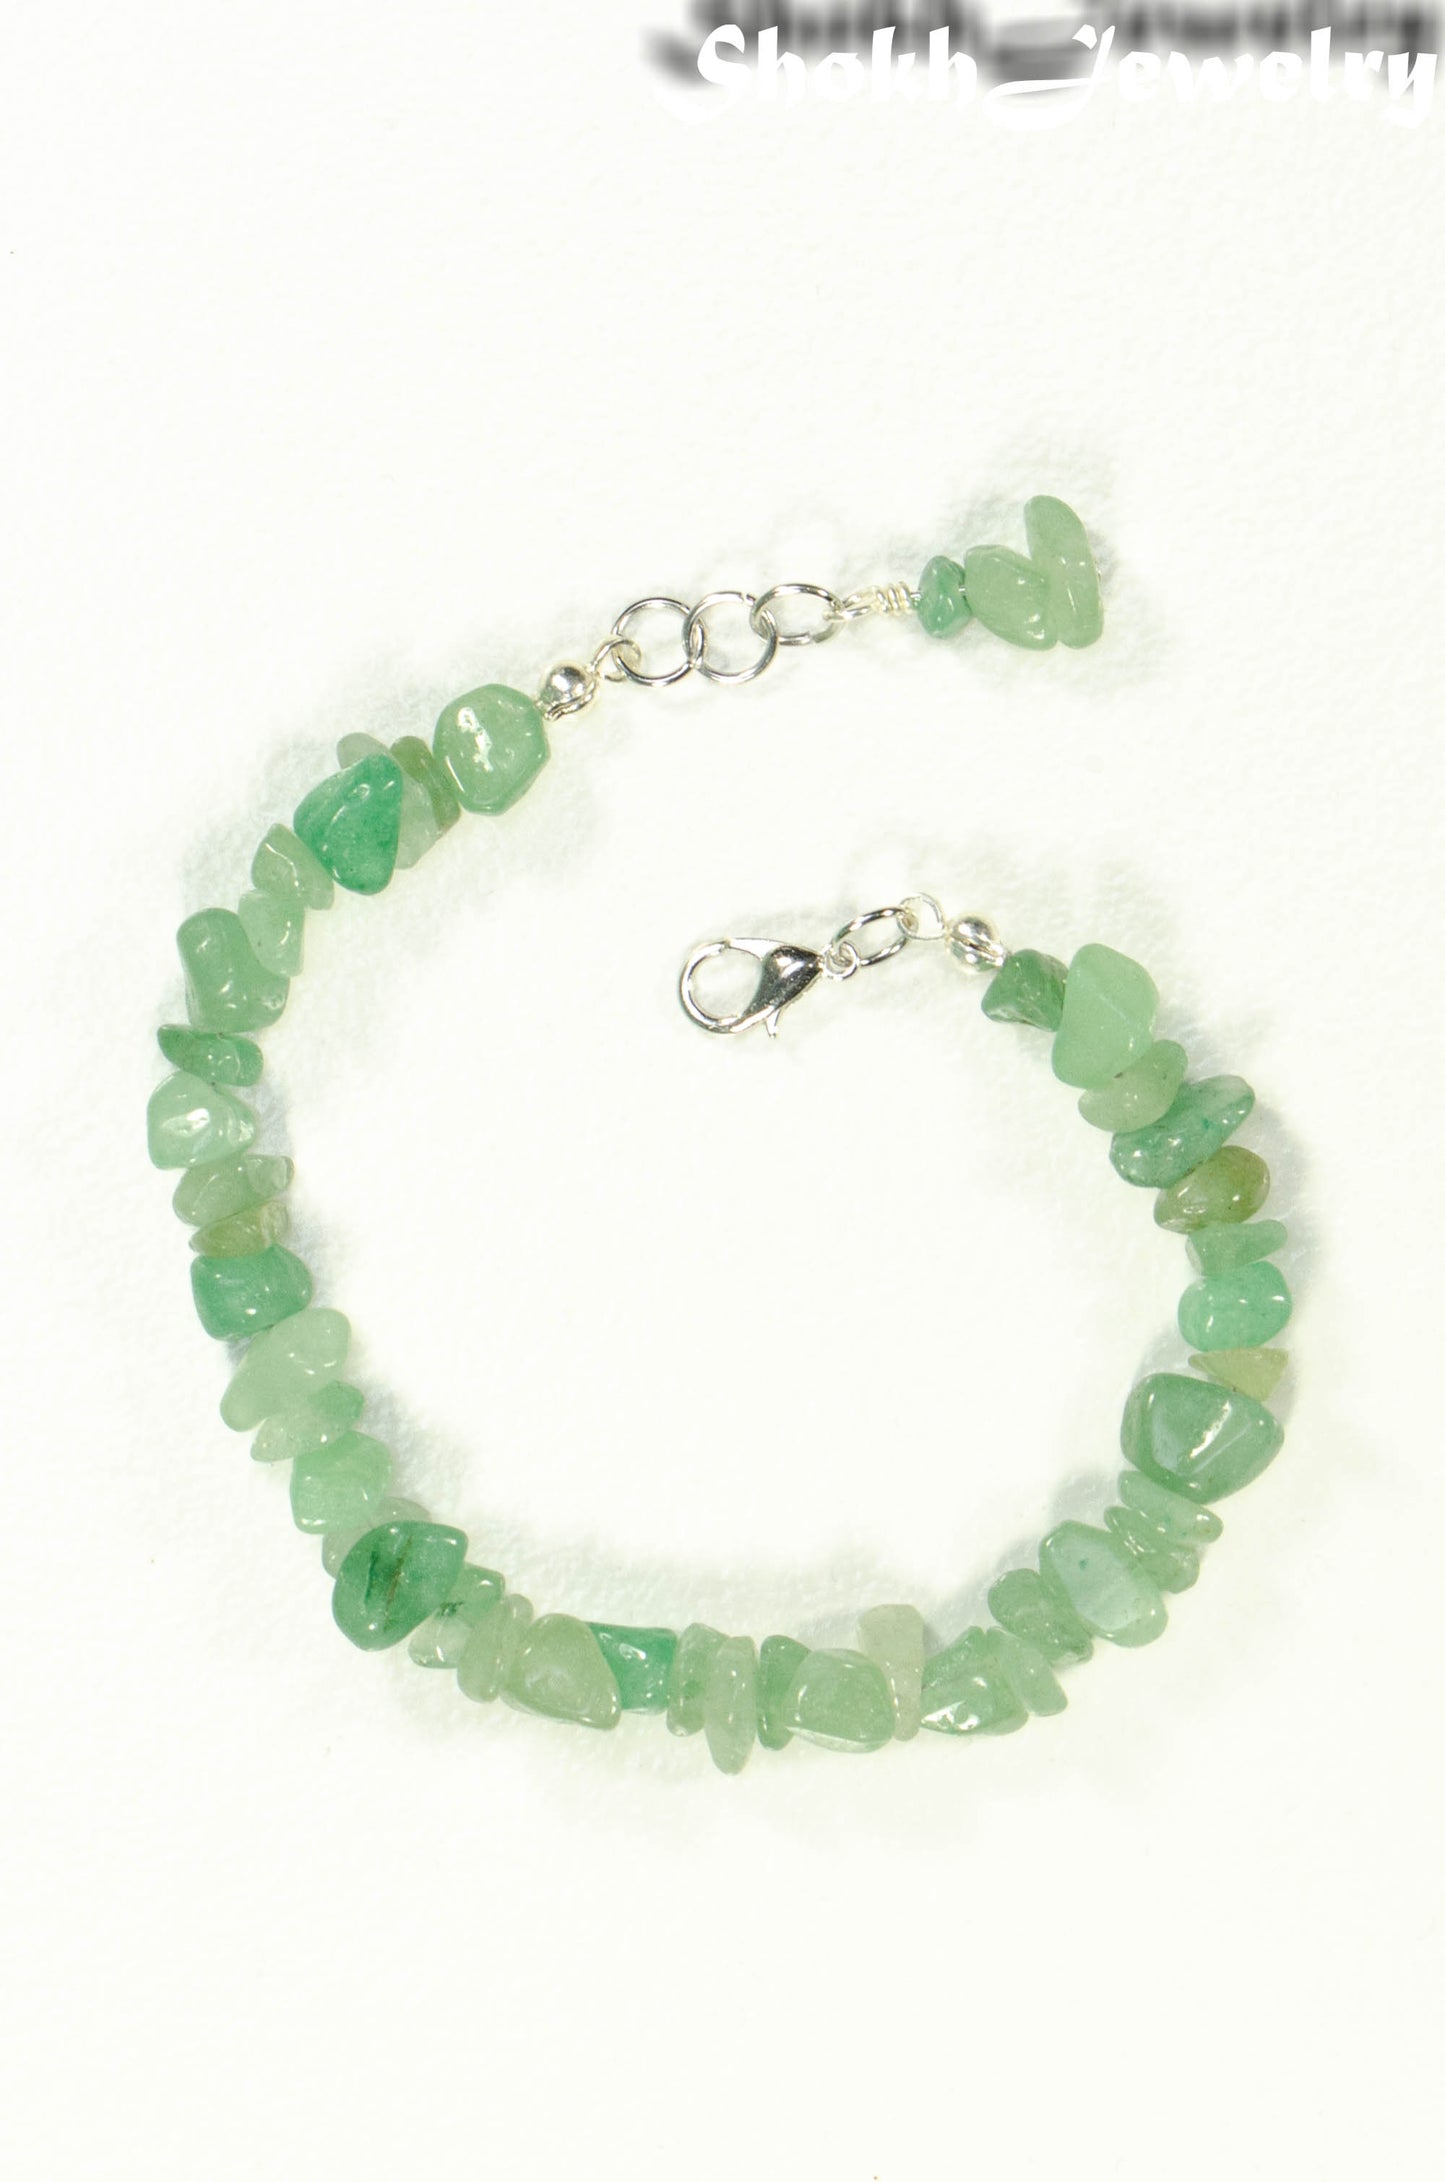 Top view of Natural Green Aventurine Crystal Chip Bracelet.